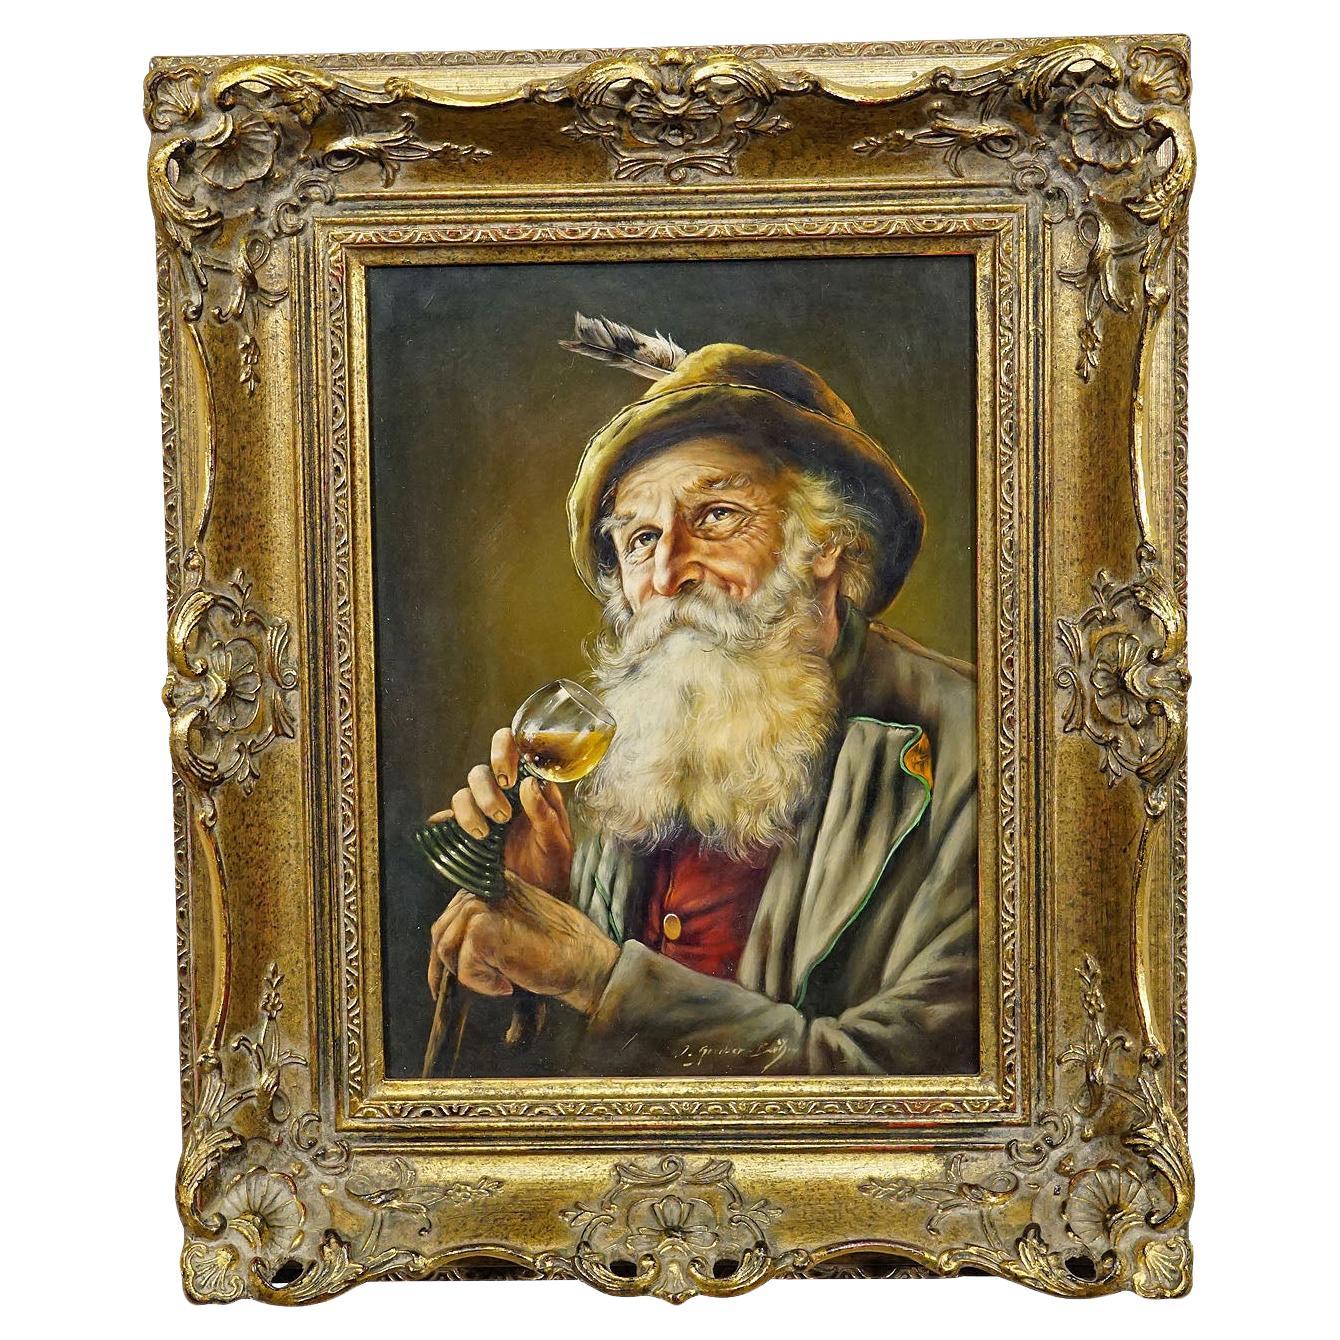 J. Gruber - Portrait of a Bavarian Folksy Man with Wine Glass, Oil on Wood For Sale